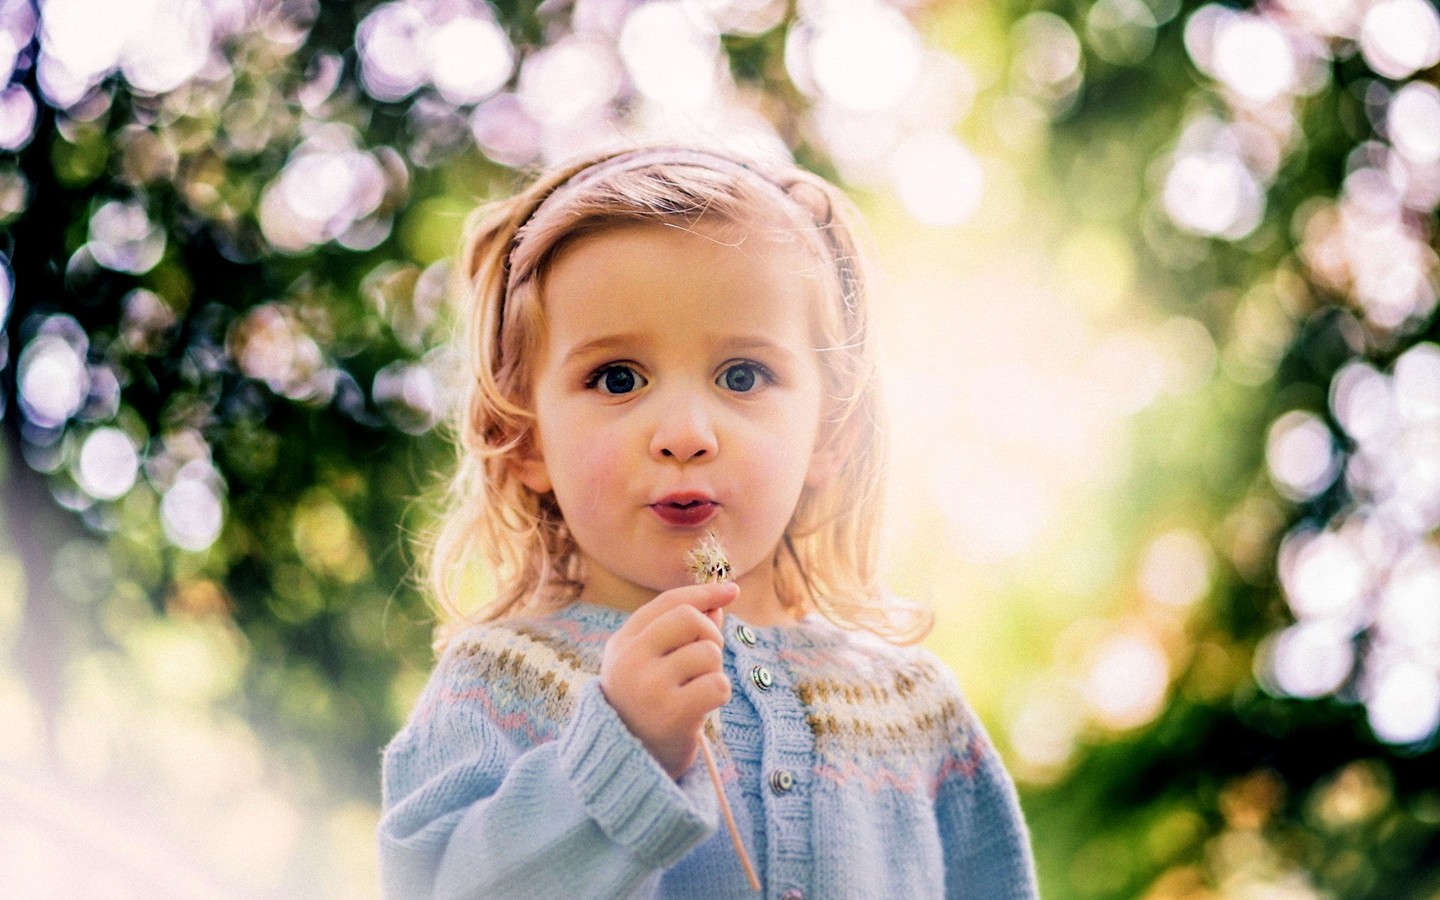 Little girl with blue hair stock photos and royalty-free images - wide 1